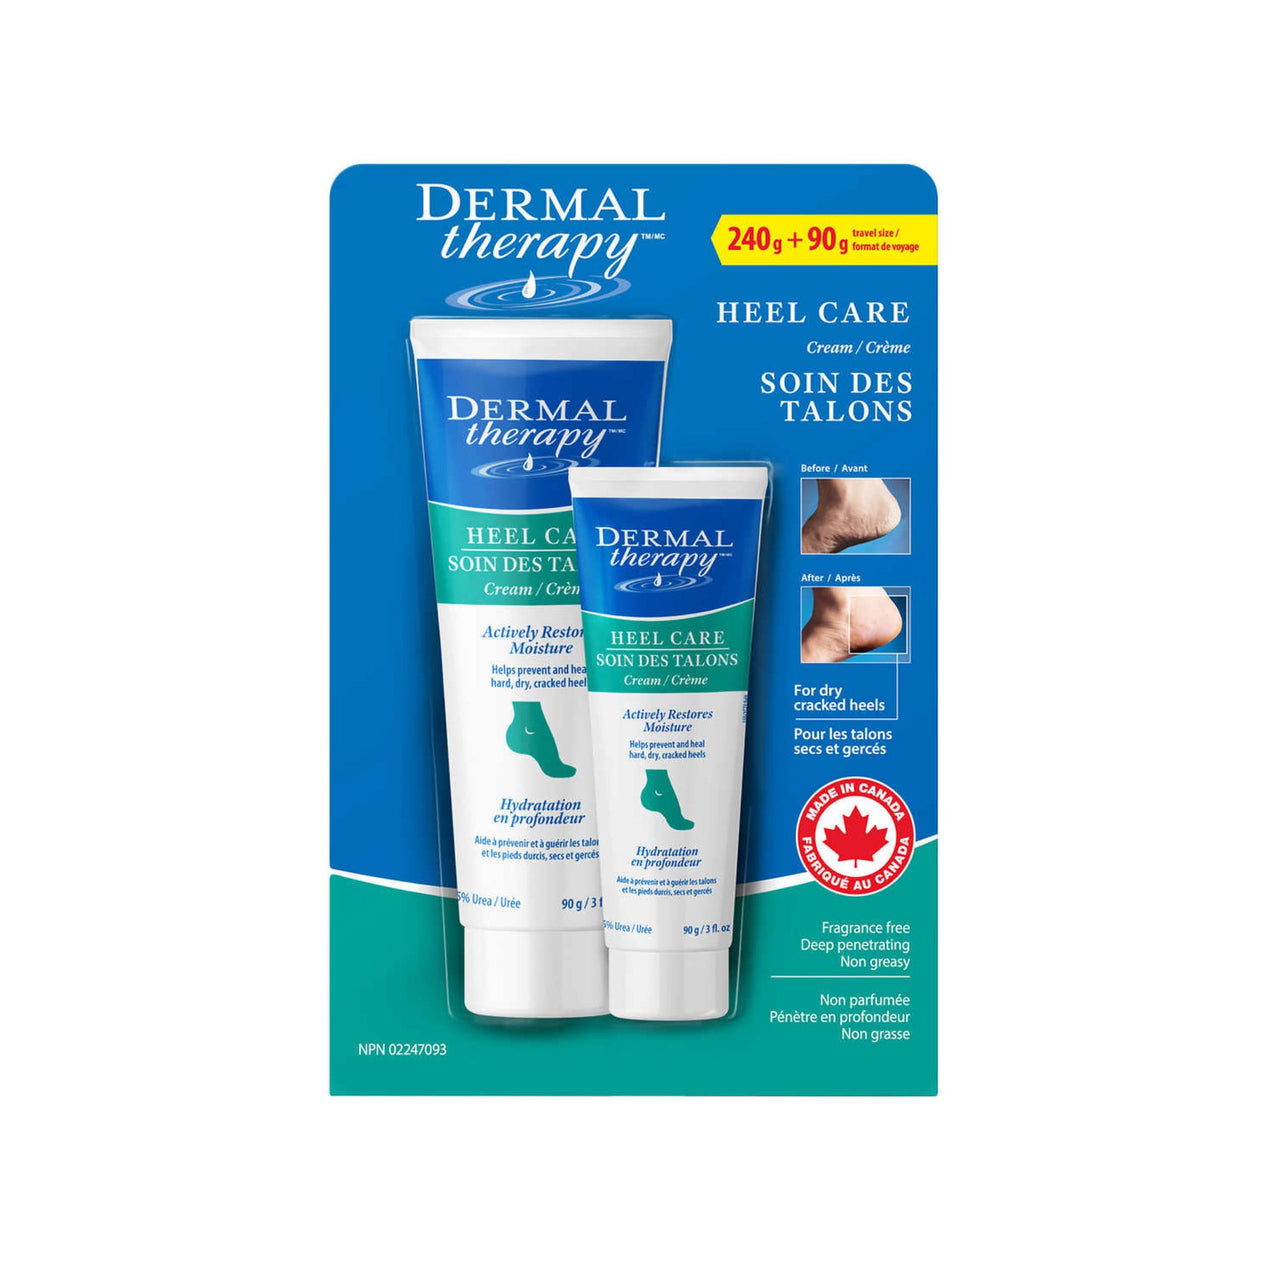 Image of Dermal Therapy Heel Care 240g + 90g travel size